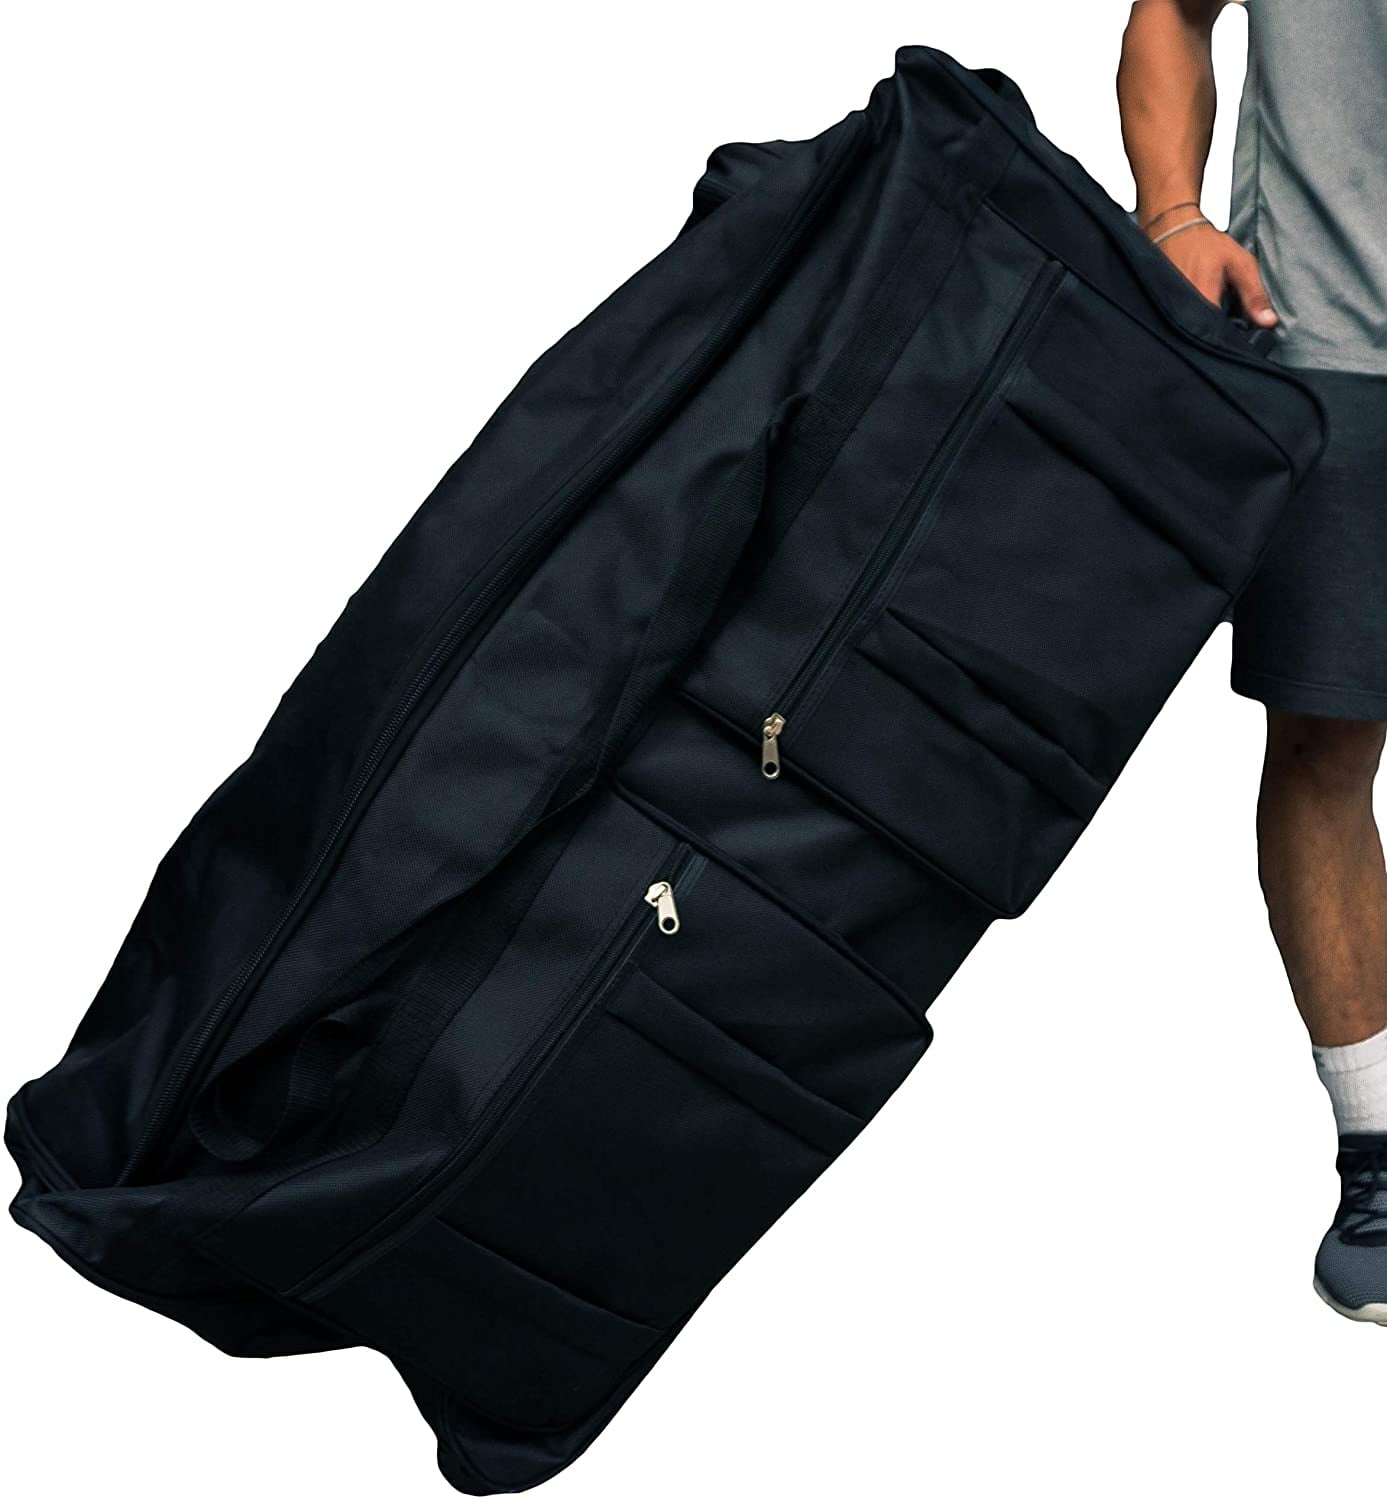 Gothamite 42-inch Rolling Duffle Bag with Wheels, XL Duffle Bag With ...